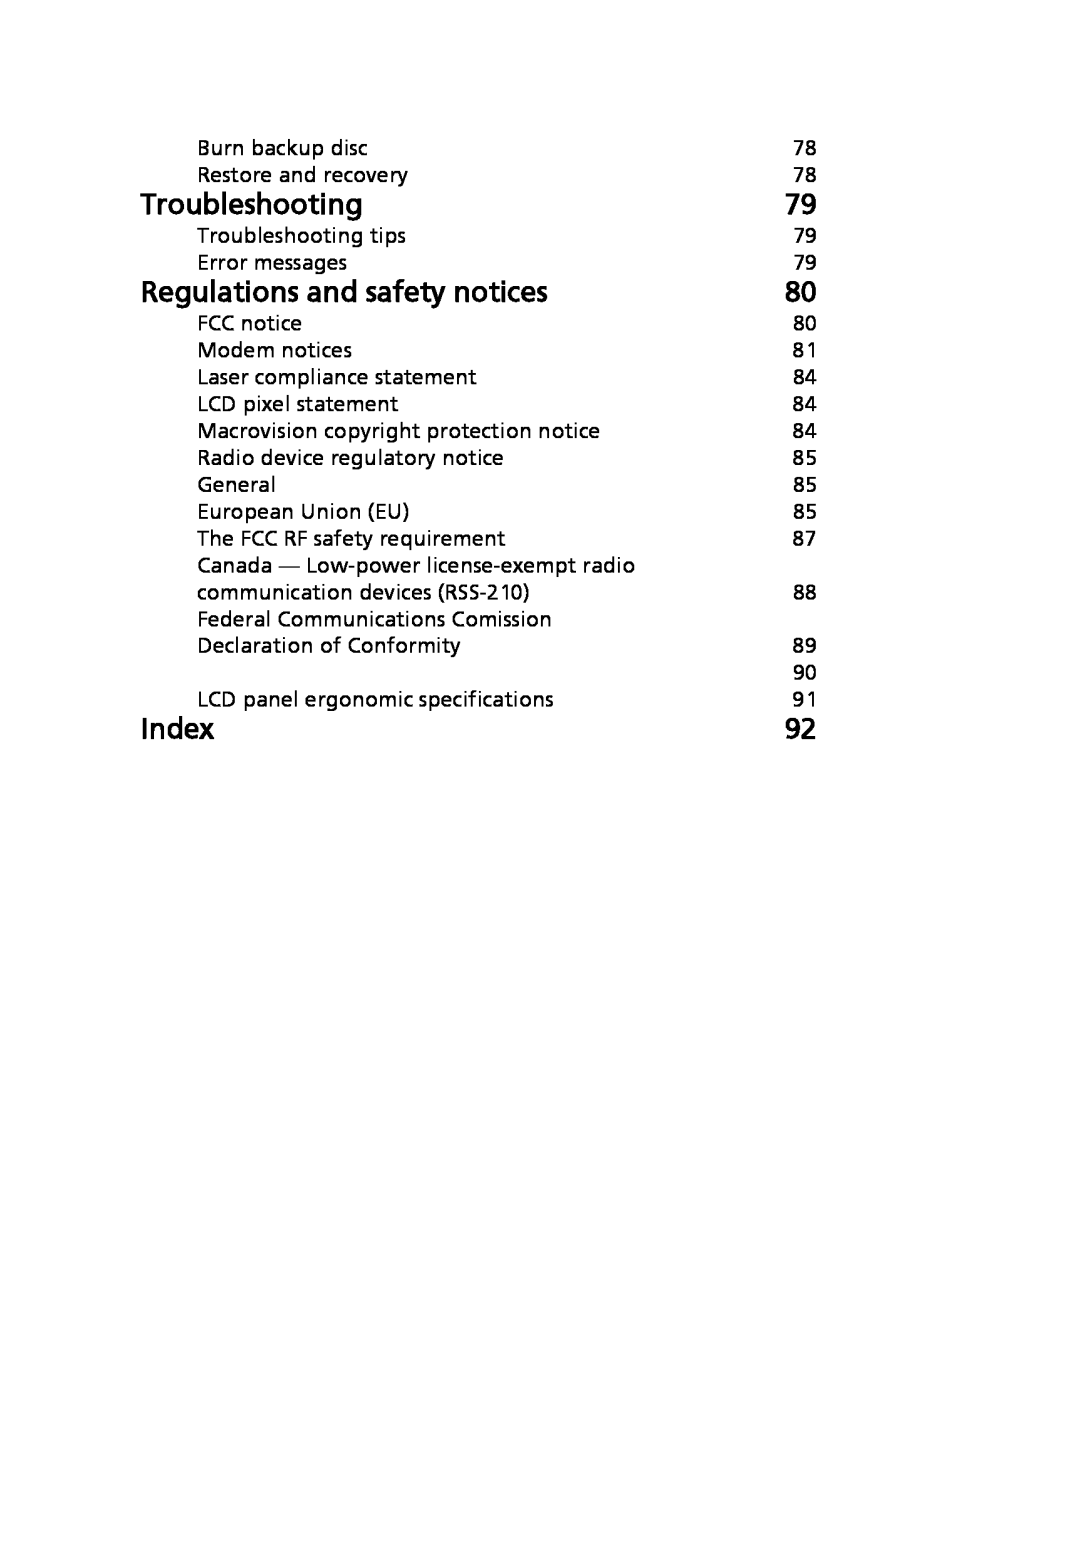 Acer 5410 Series, 5010 Series manual Troubleshooting, Regulations and safety notices, Index 